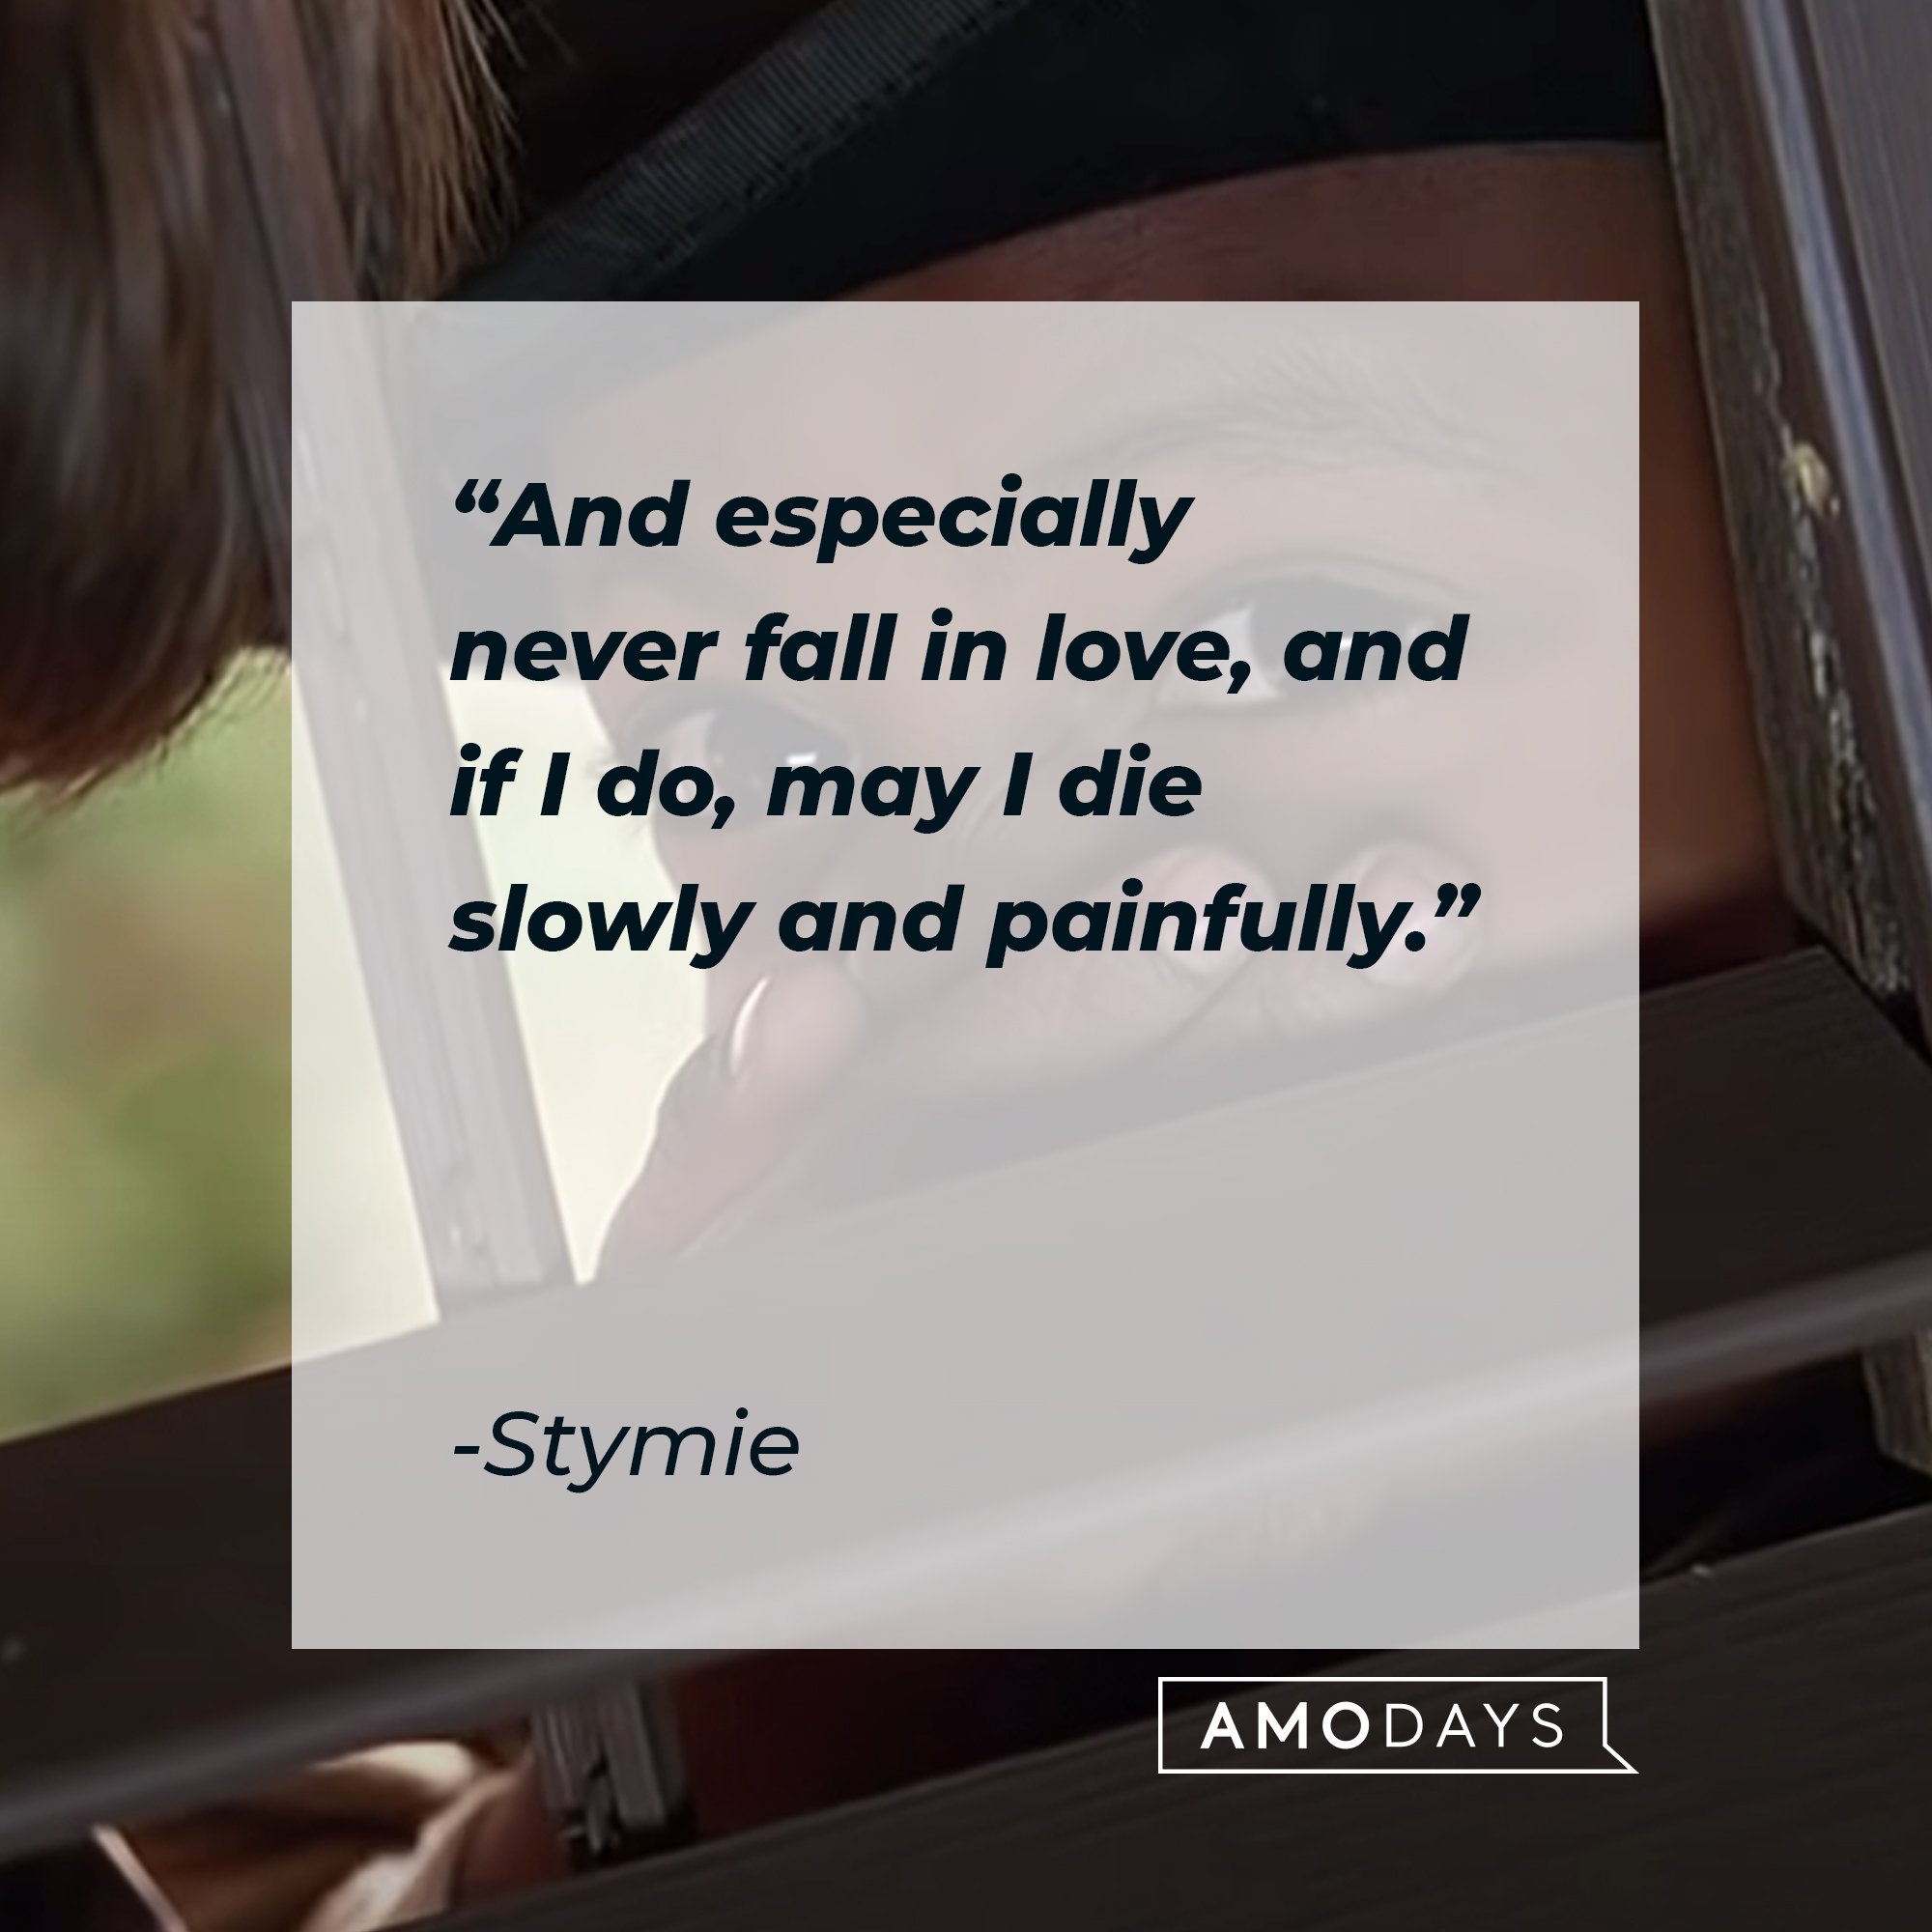 Stymie’s quote: "And especially never fall in love, and if I do, may I die slowly and painfully." | Image: AmoDays